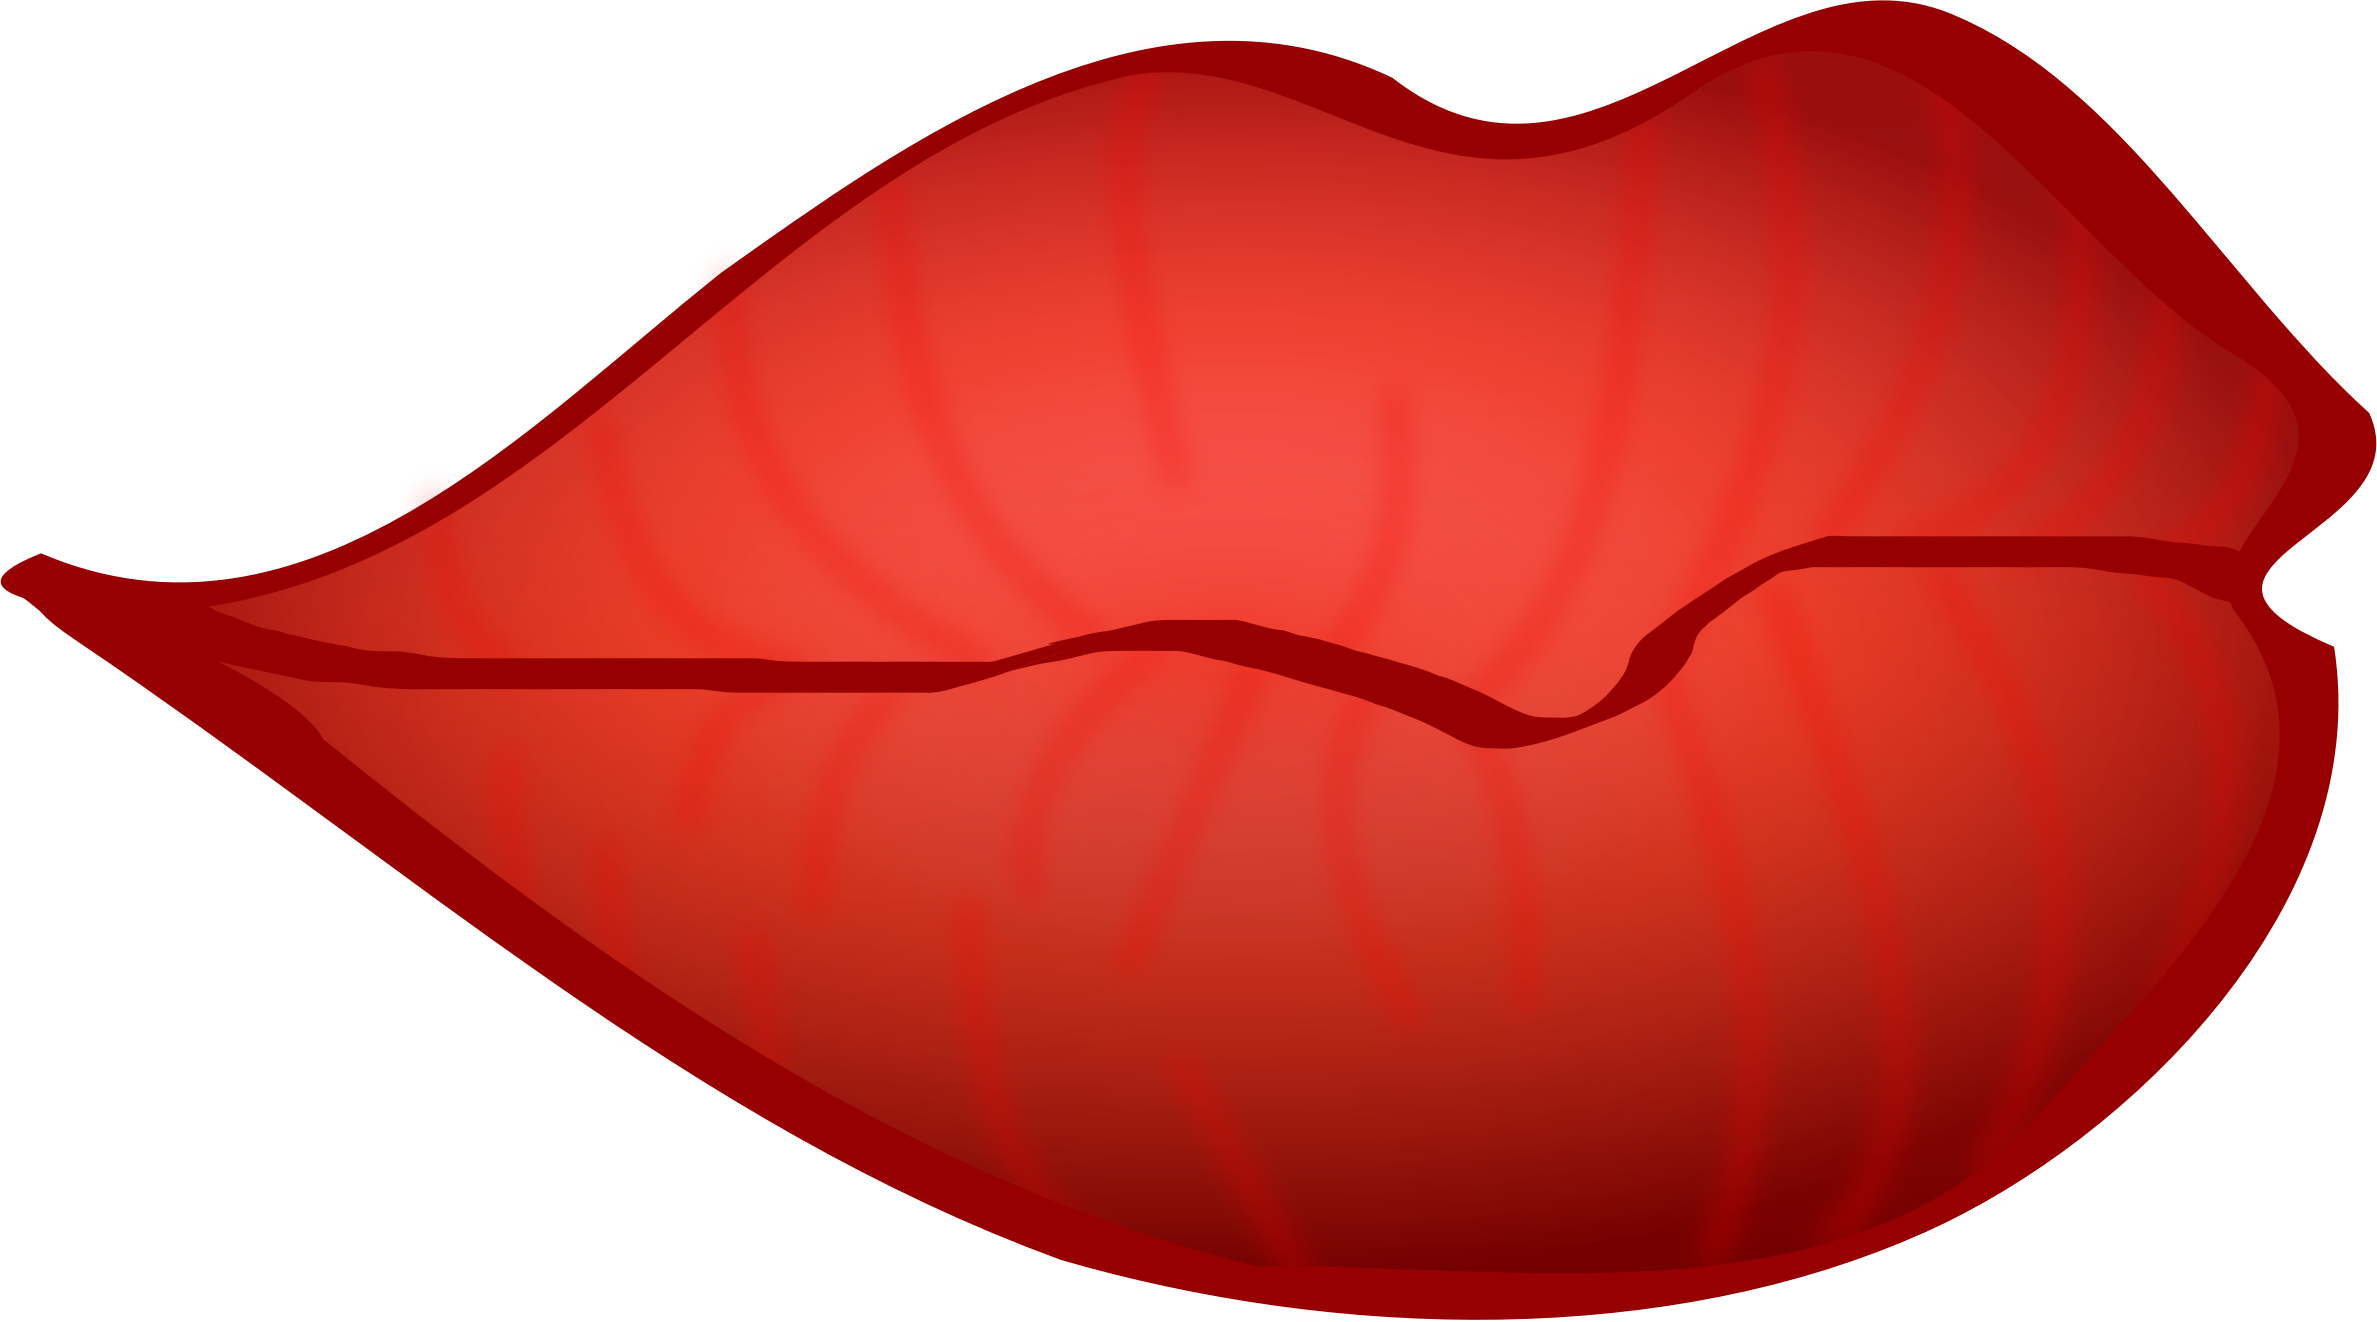 Classy red lips clipart